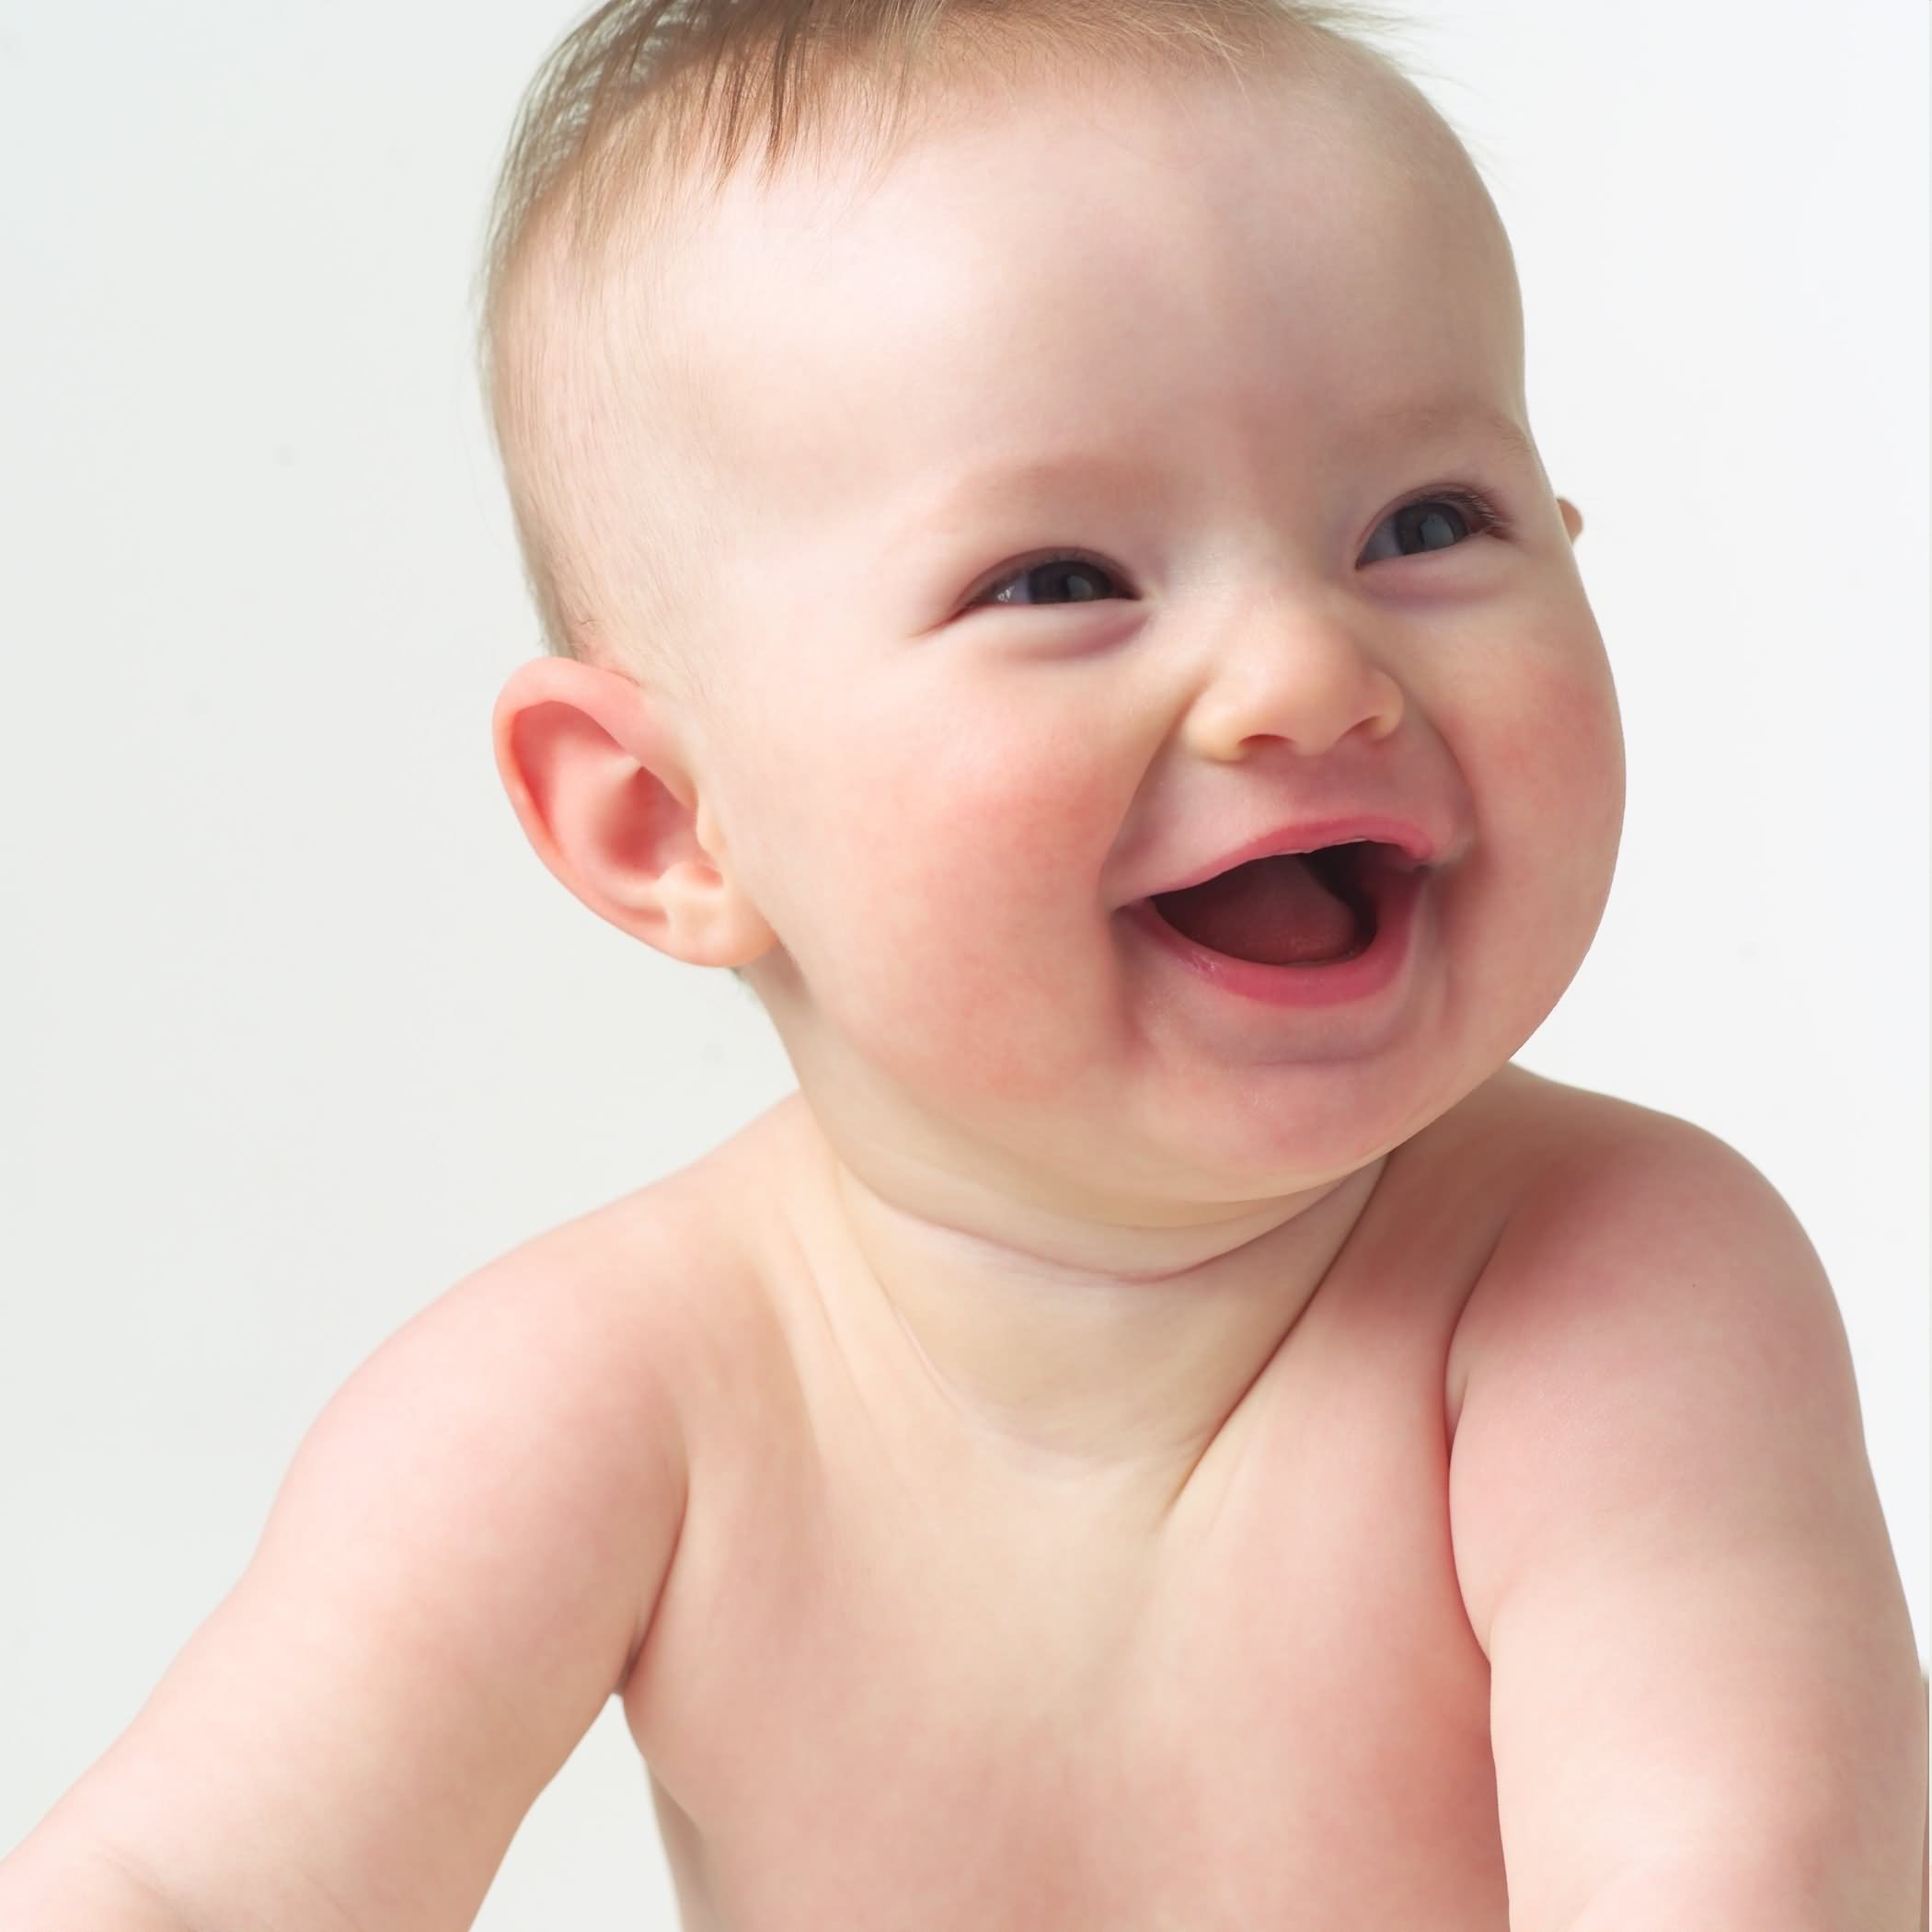 Funny Baby Laughing Image